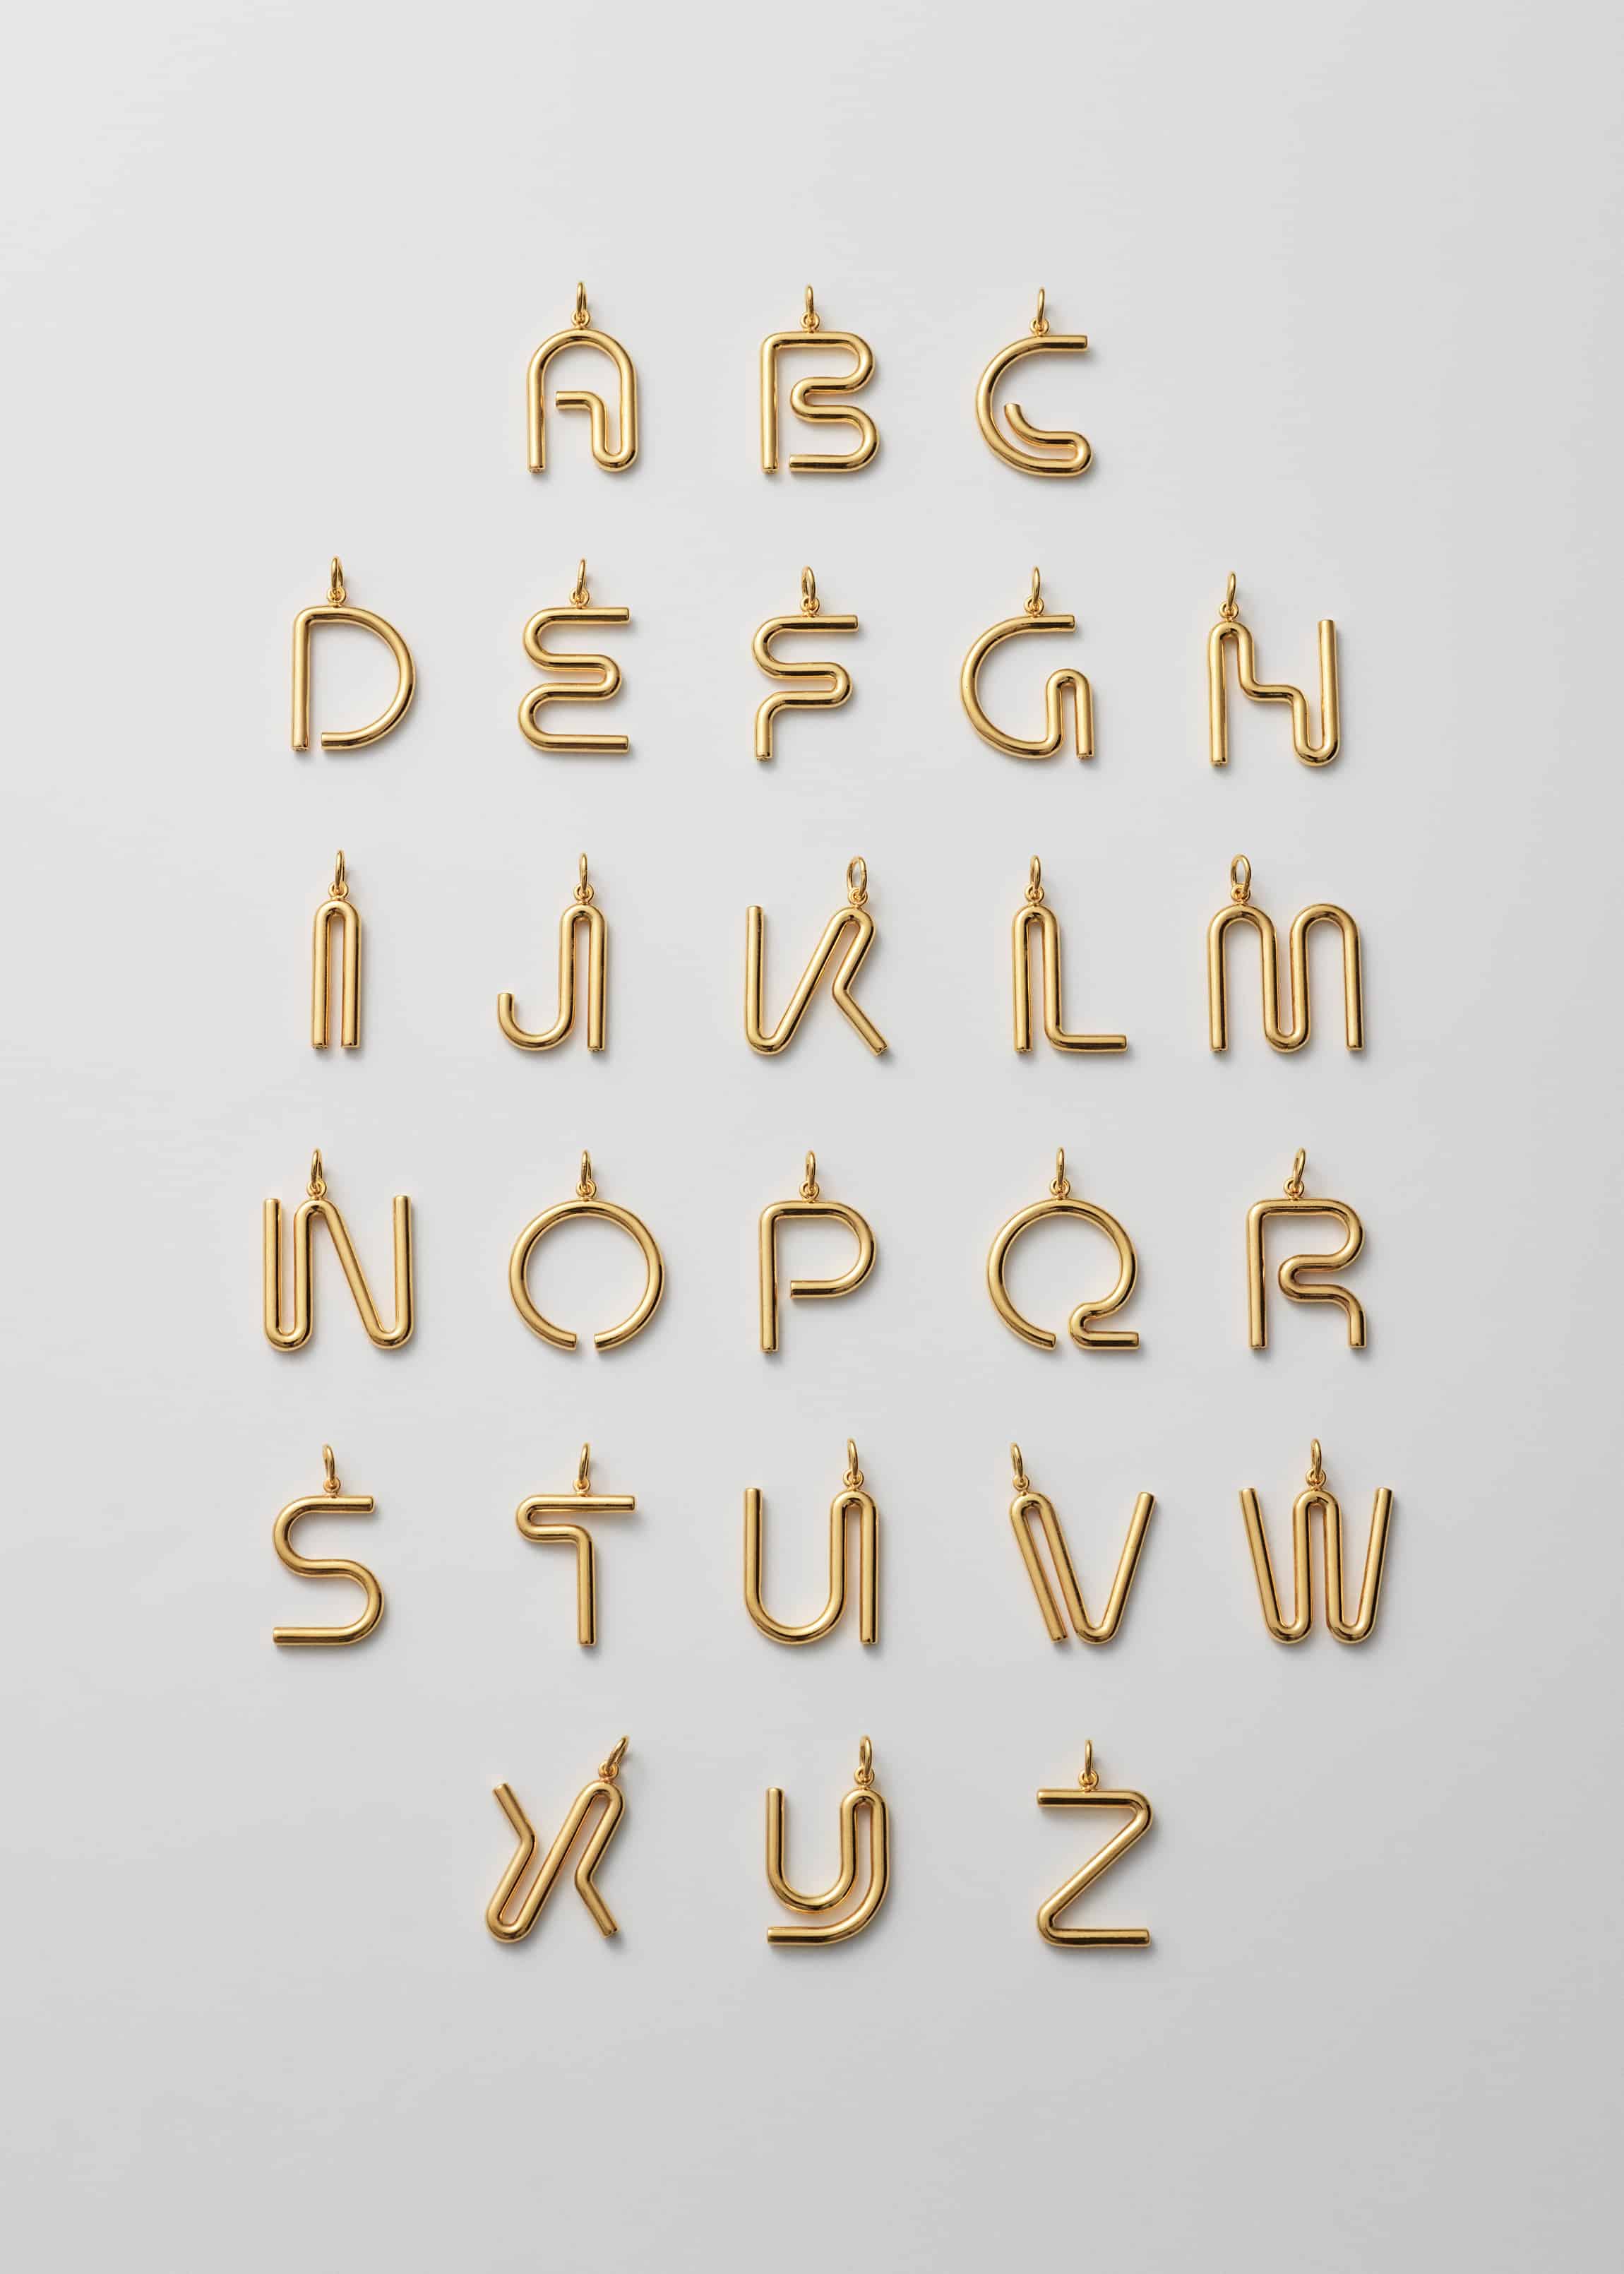 LetternGold